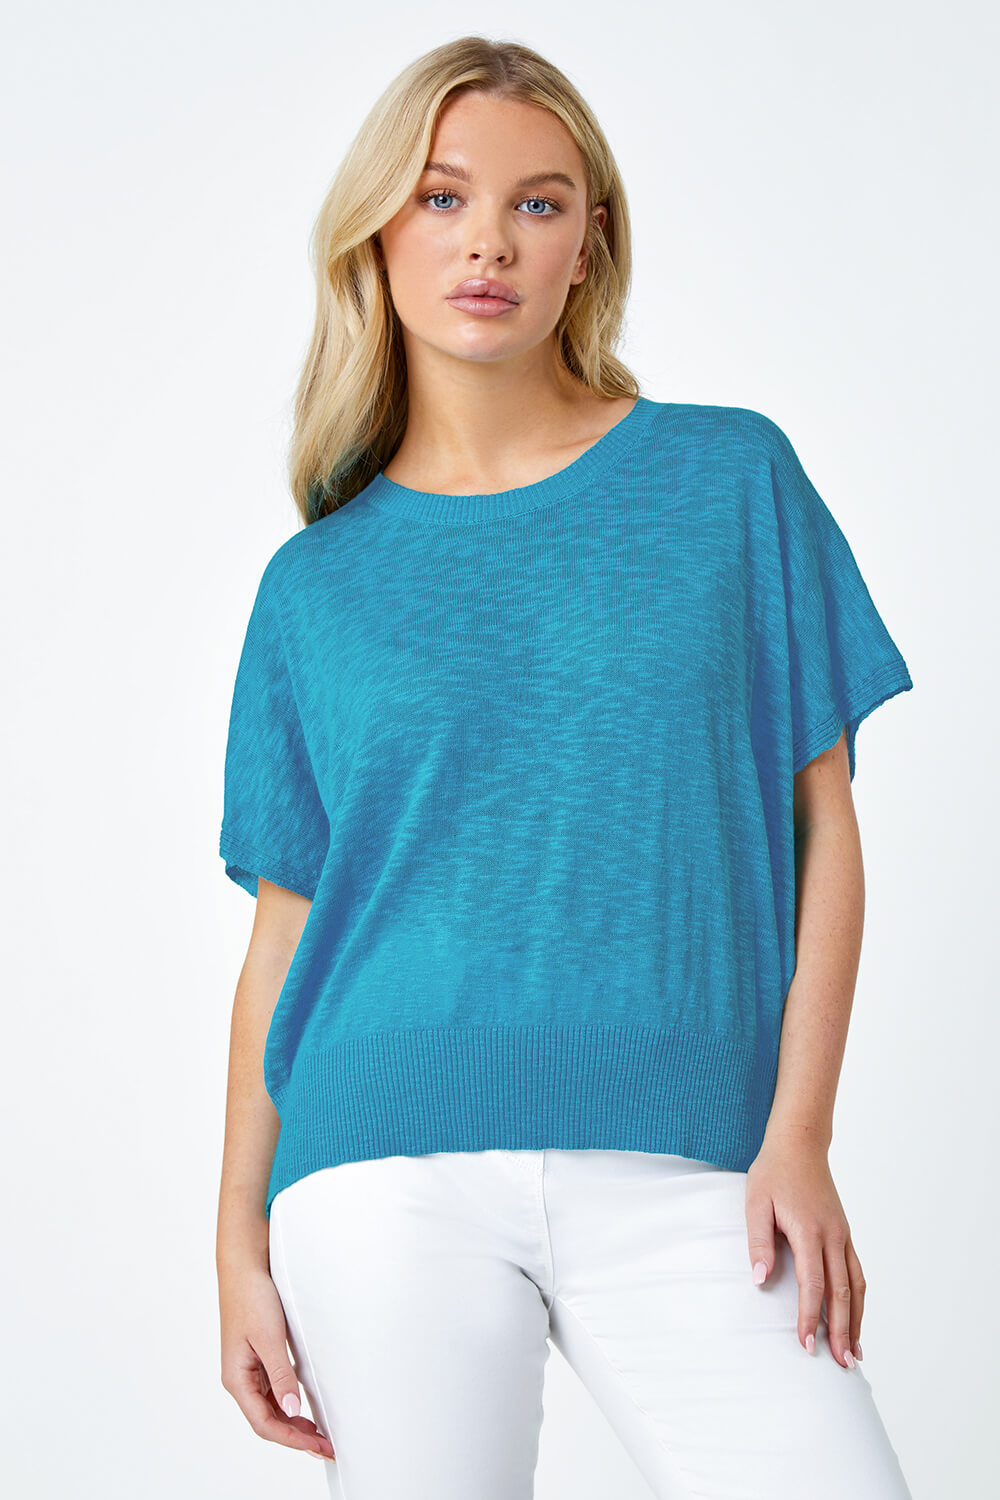 Turquoise Petite Cotton Blend Textured Knit Top, Image 4 of 5